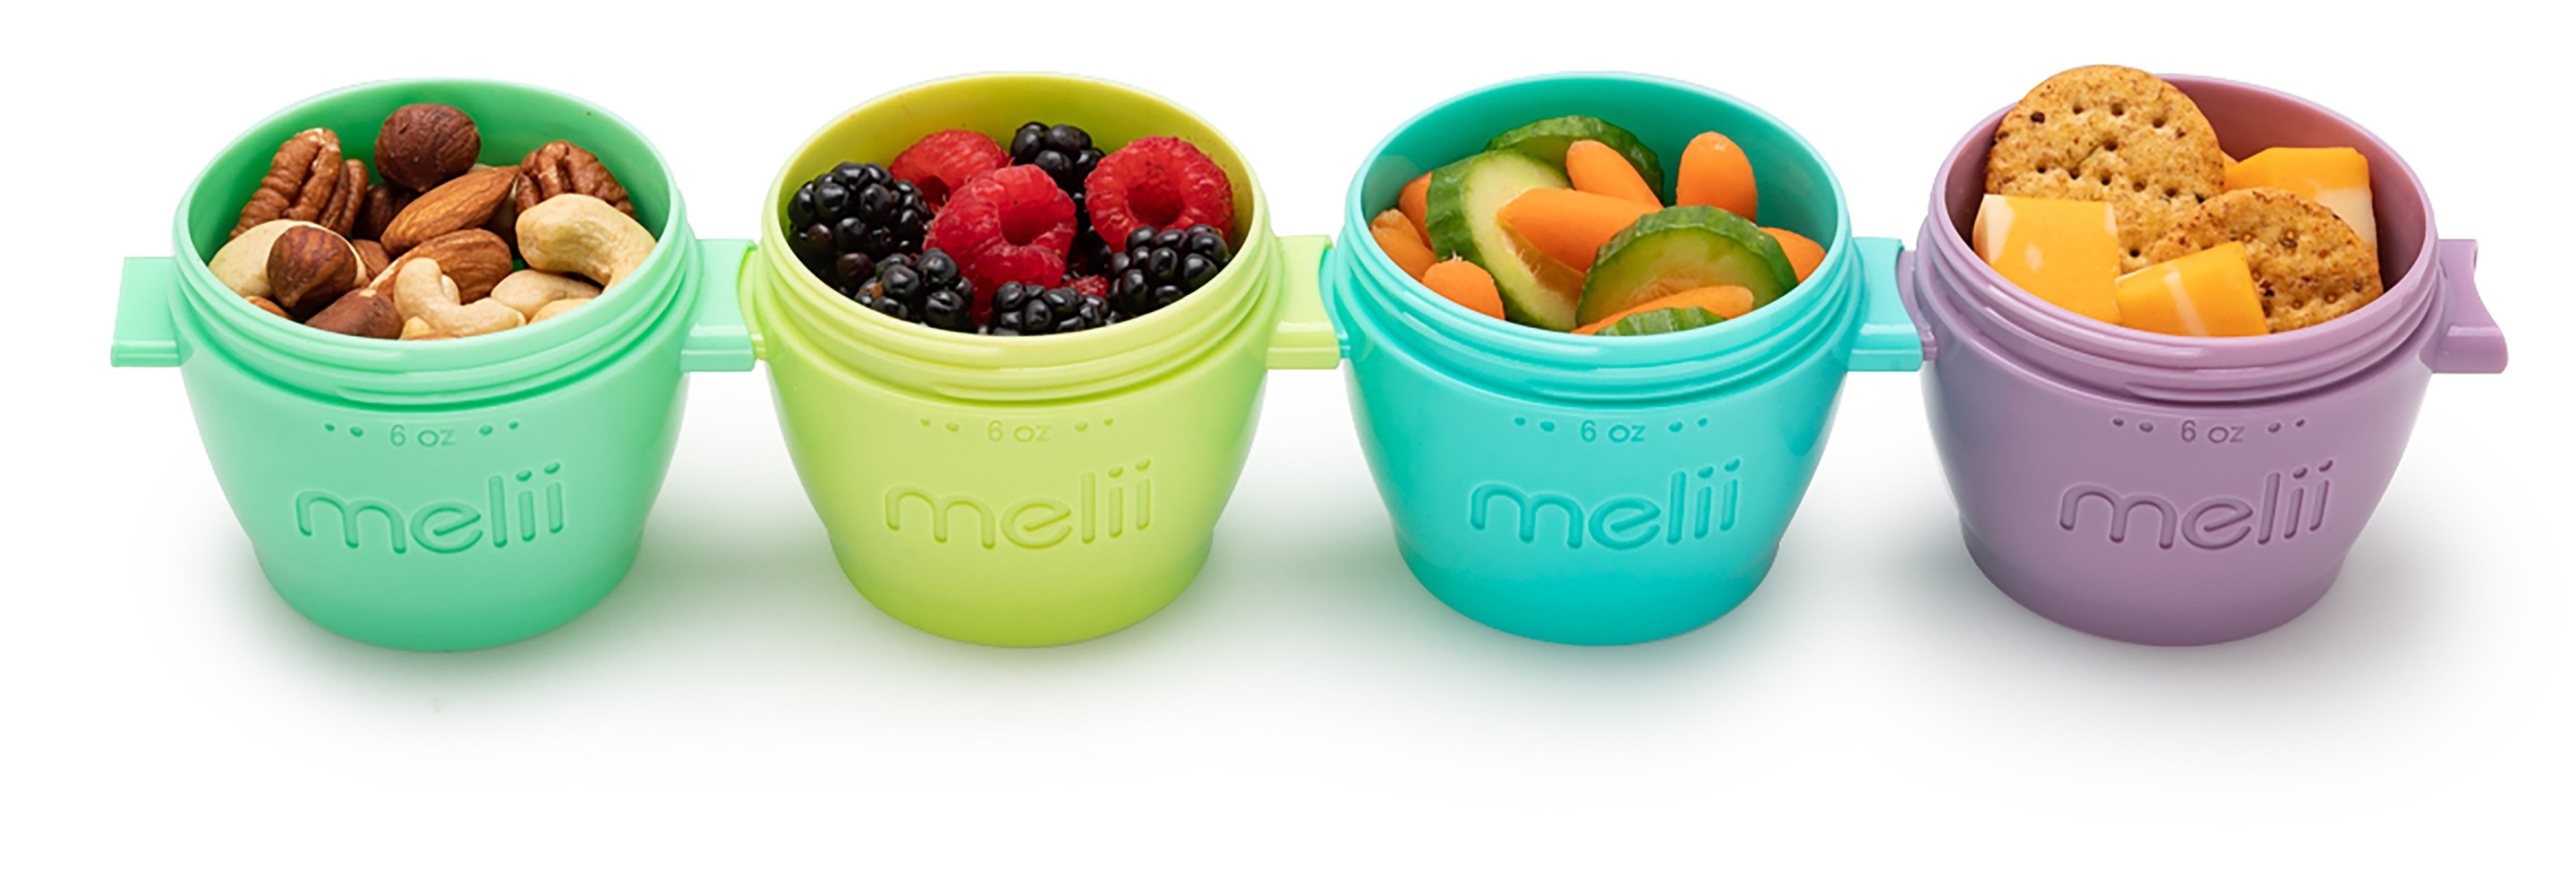 melii Snap & Go Pods for Baby Food and Snack Storage 4 oz 4 pack